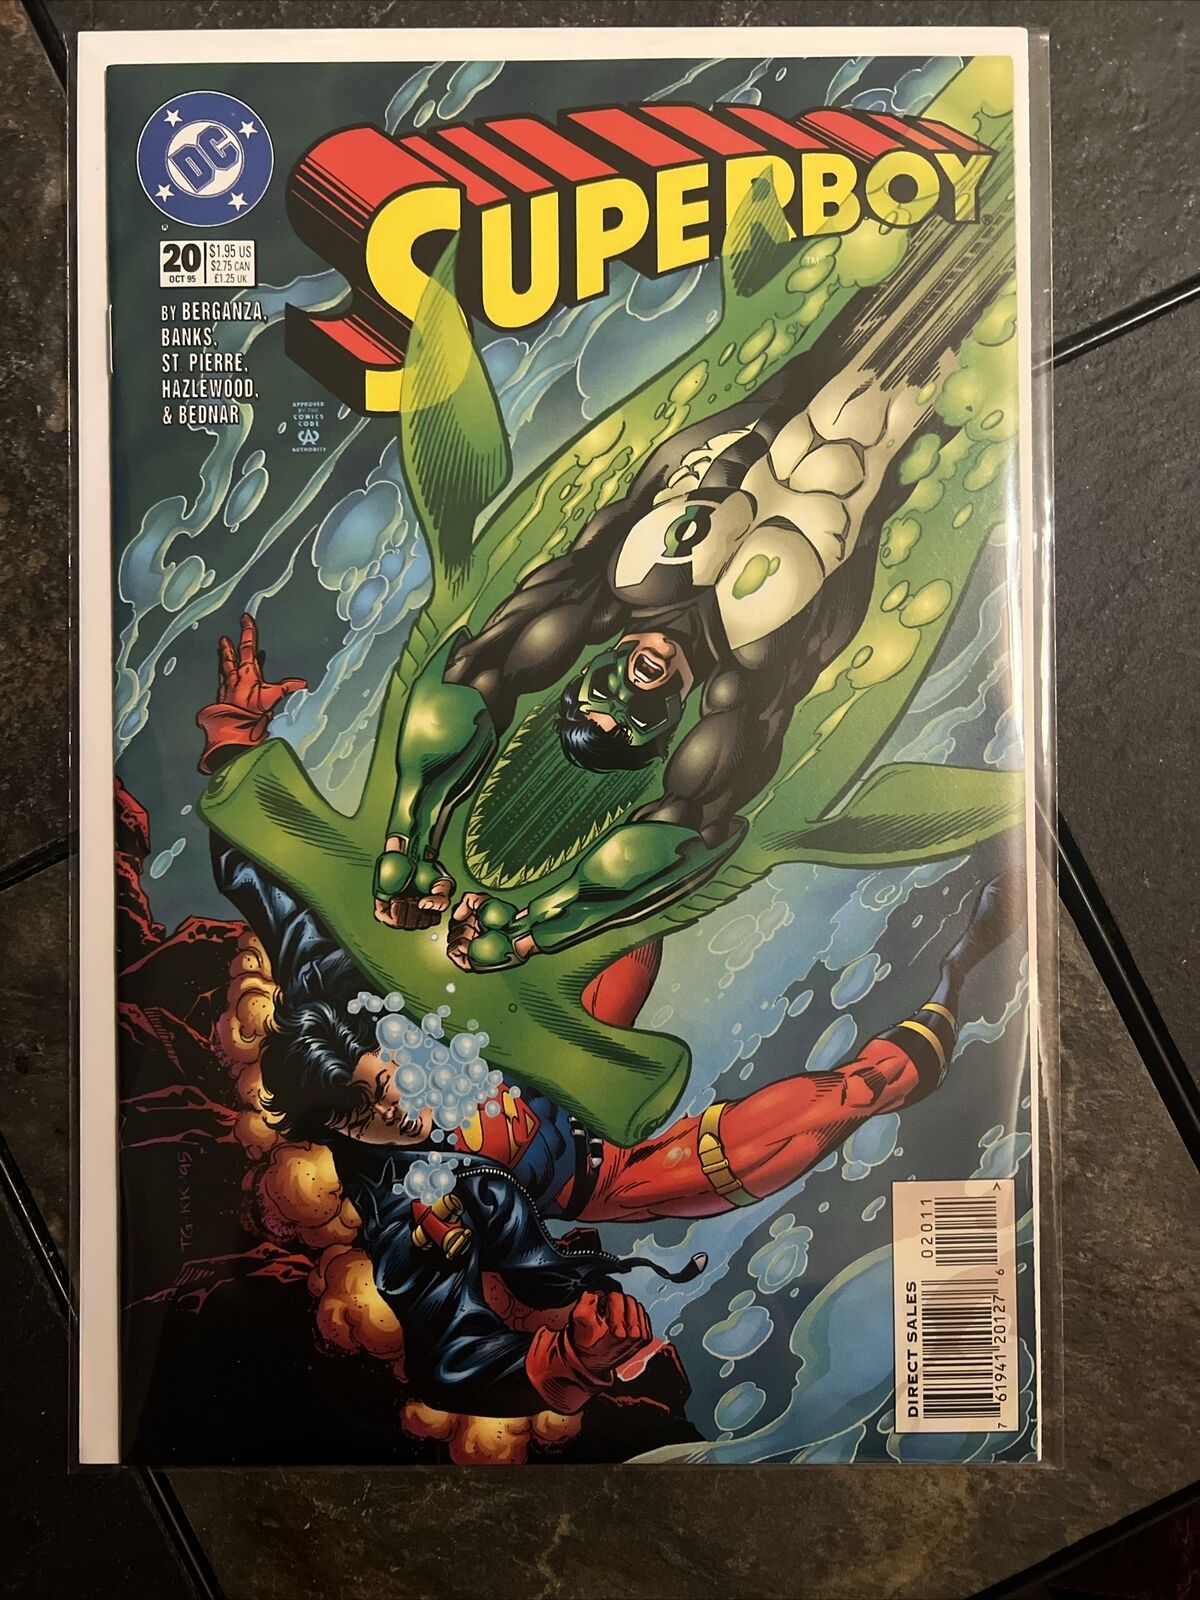 Superboy (1994 series) #20 in Near Mint minus condition. DC comics